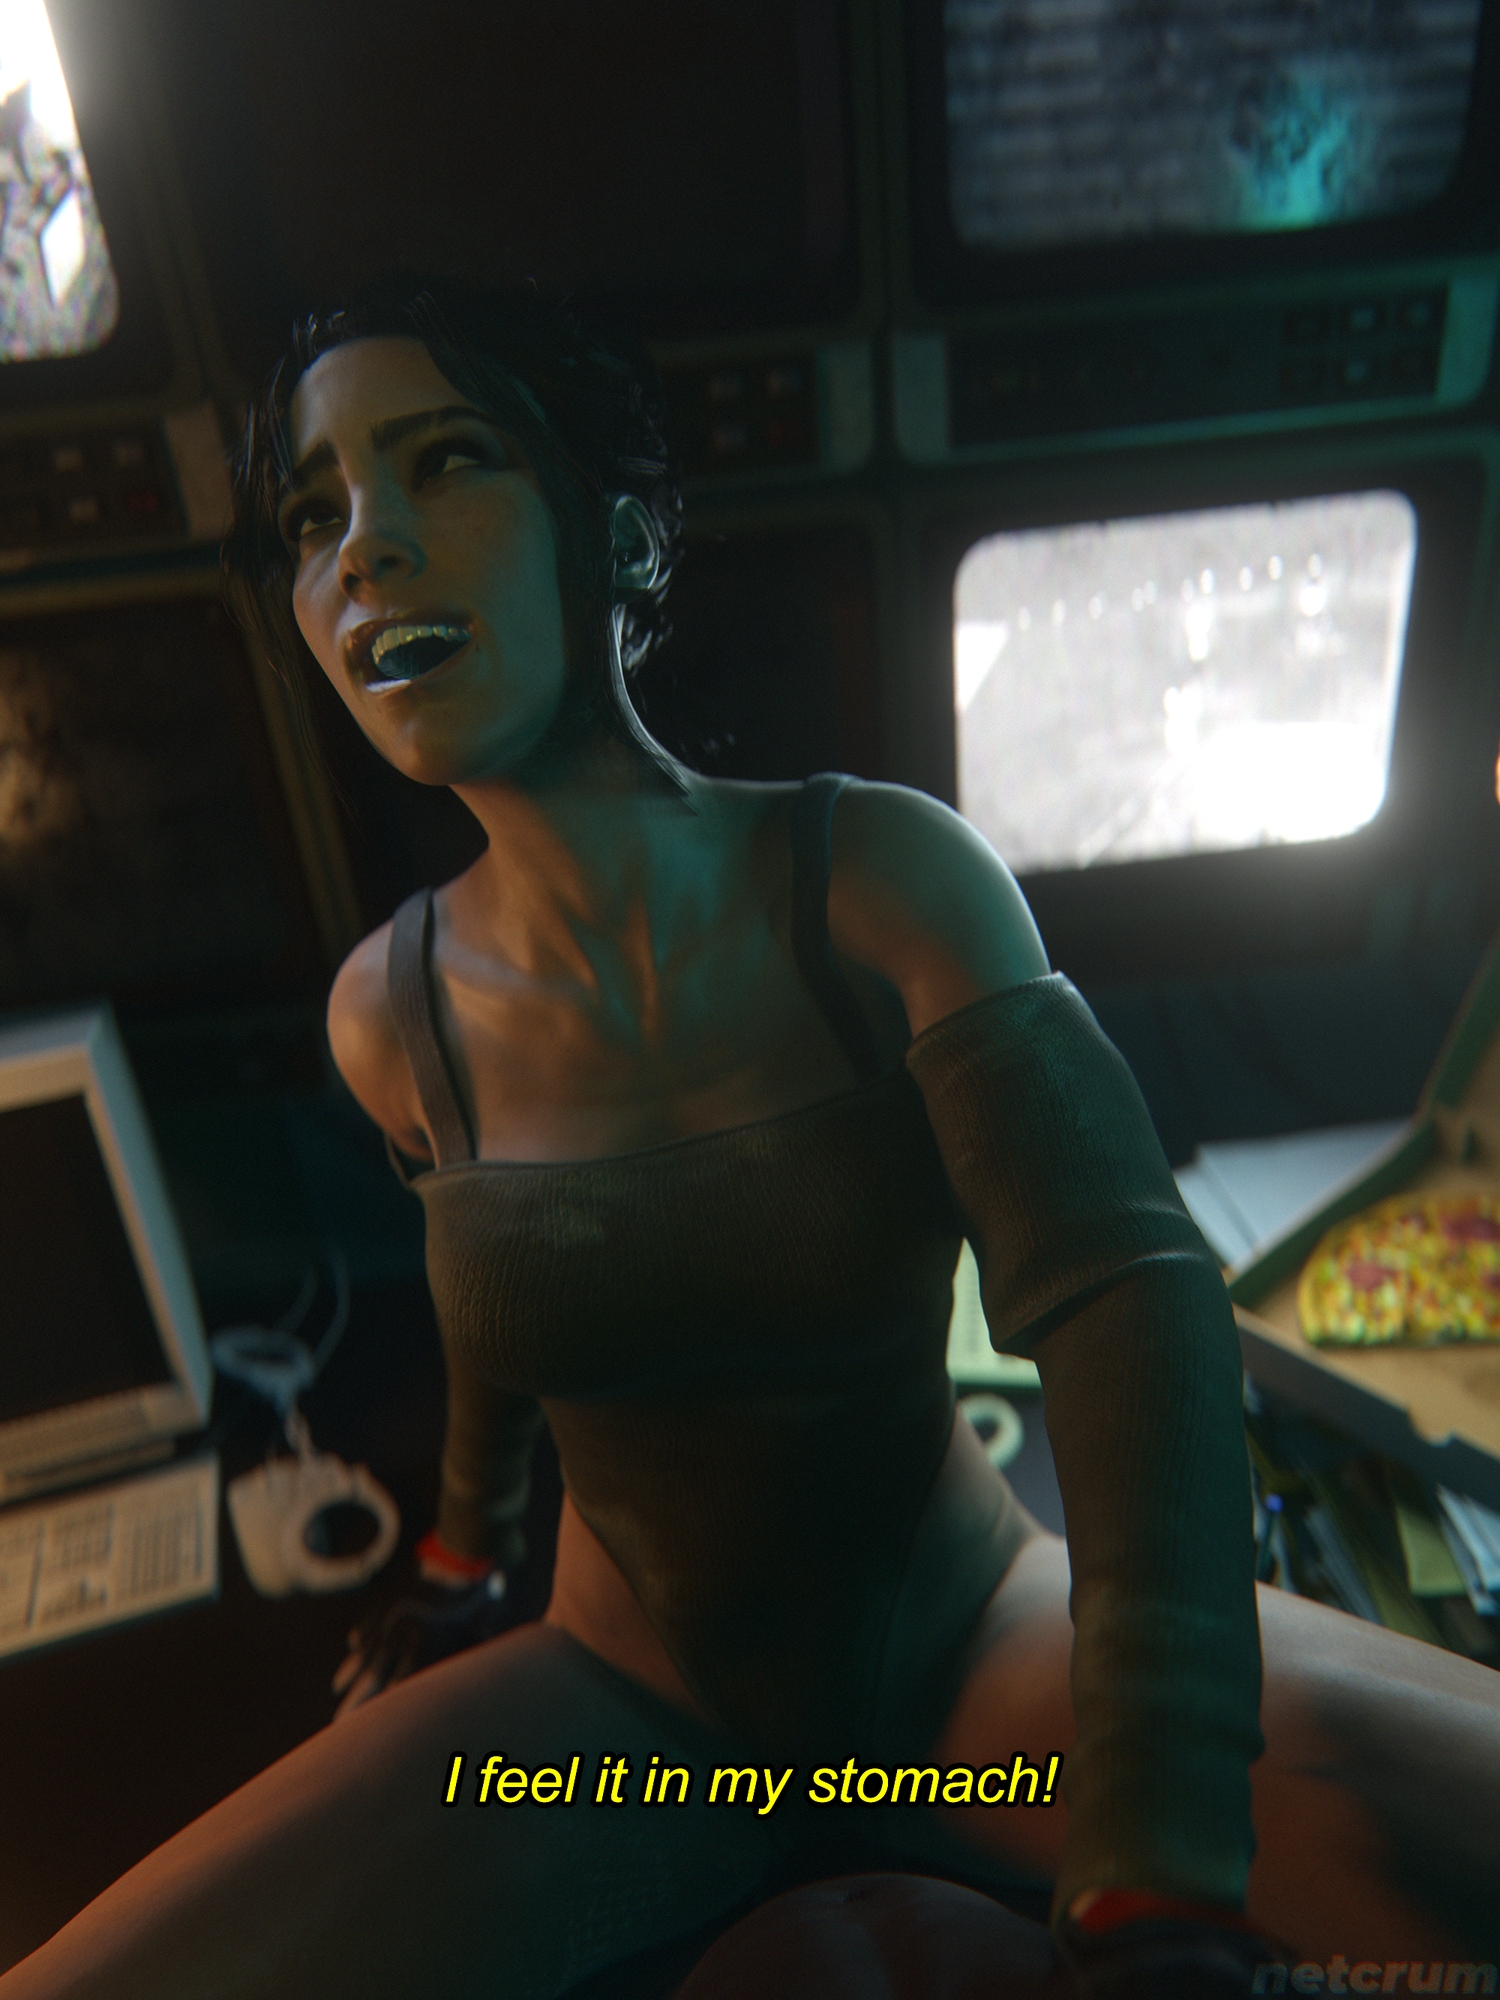 Panams Alternate Mission Panam Palmer Cyberpunk2077 Cyberpunk Big Tits Big Cock Big Breasts Big Dick Big penis Big Boobs Natural Boobs Natural Tits Natural Breast Submissive 1boy1girl Smile Open legs Wrapped Legs Interracial Partially_clothed Clothing Clothed Office Vaginal Vaginal Penetration Vaginal Sex Vaginal Insertion Cleavage 4